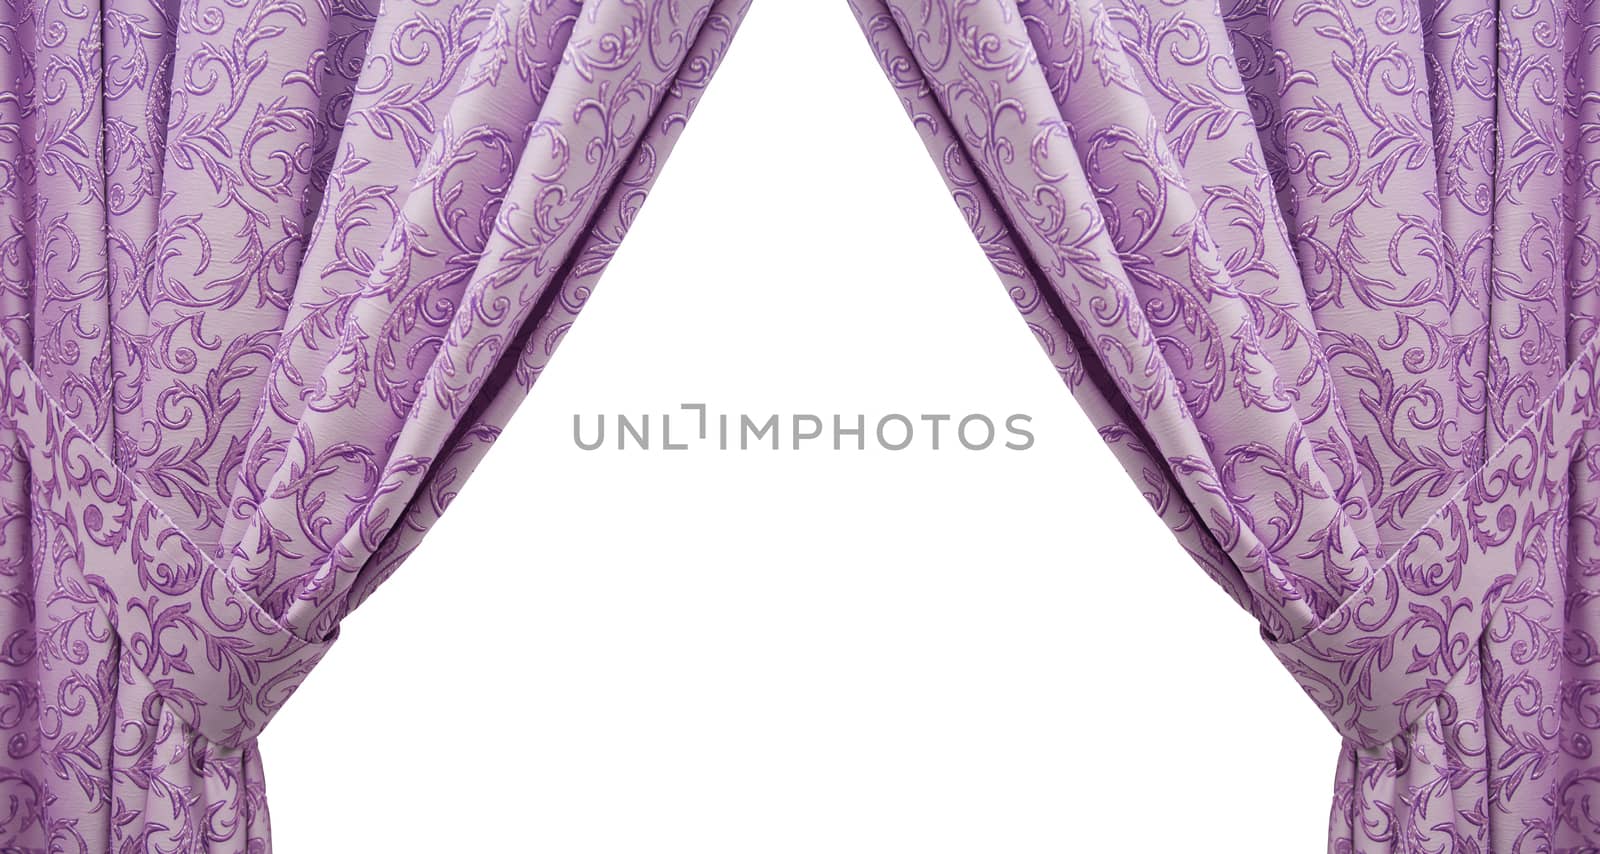 beautiful purple curtain in a classic style. isolated